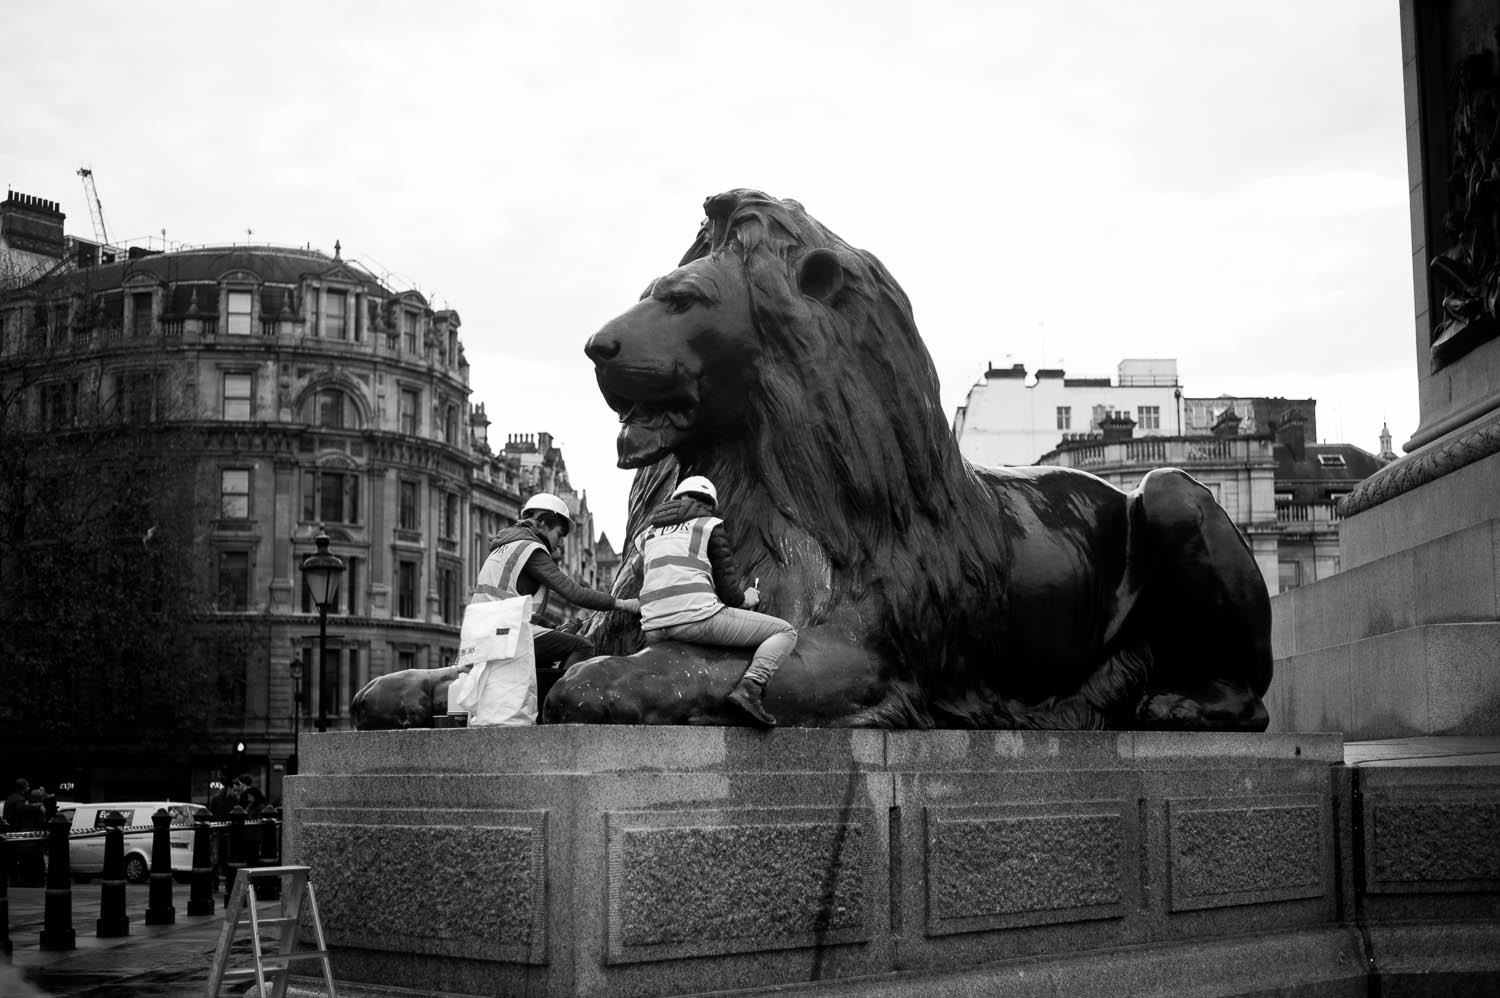 Workers scrub Lion statues clean in London